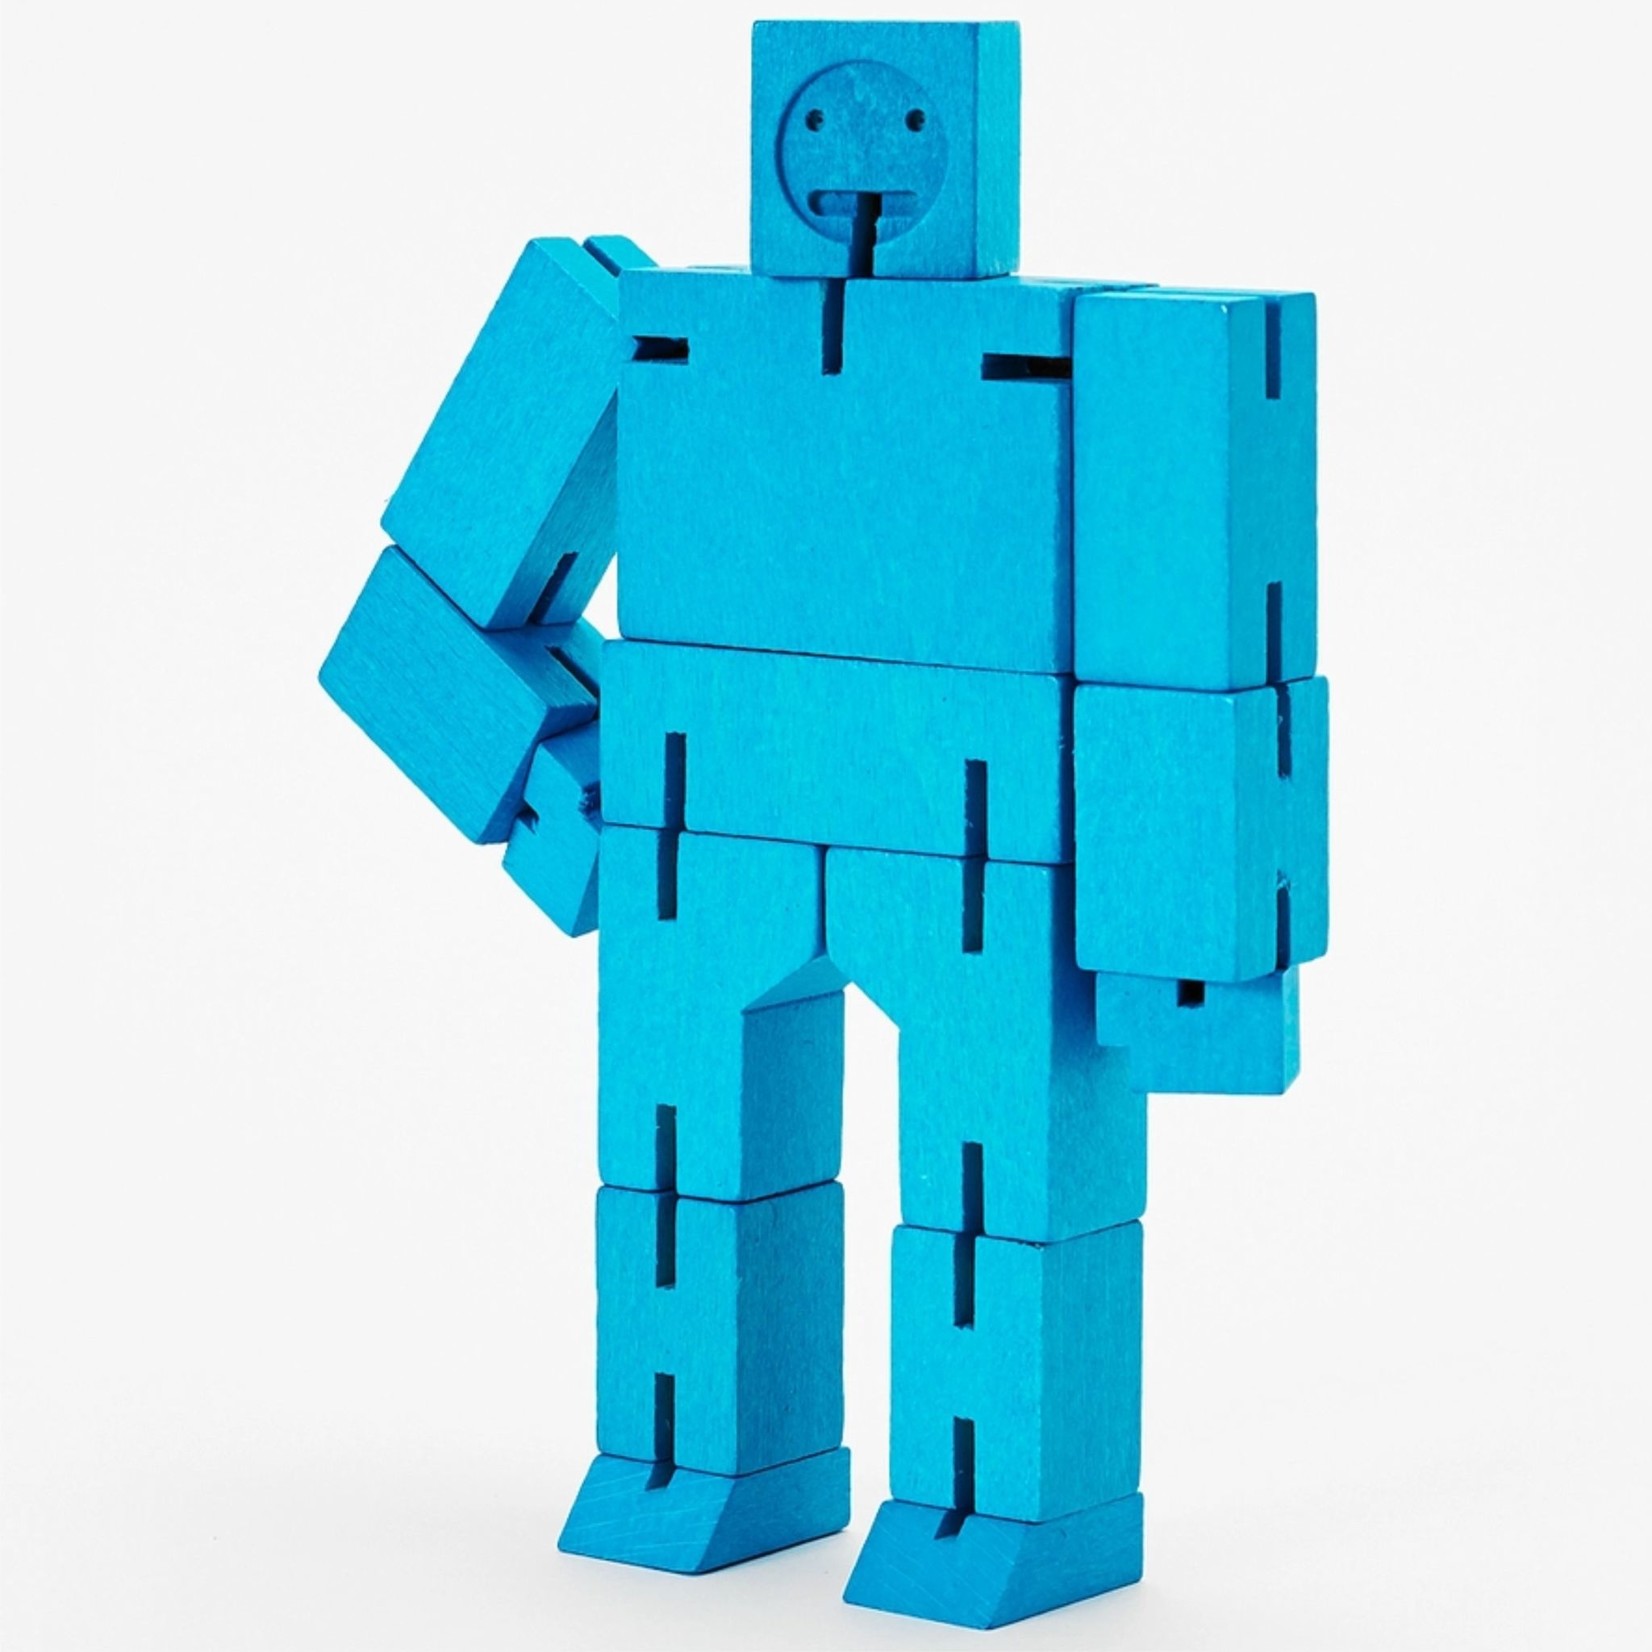 FK Living Cubebot Small - Blue